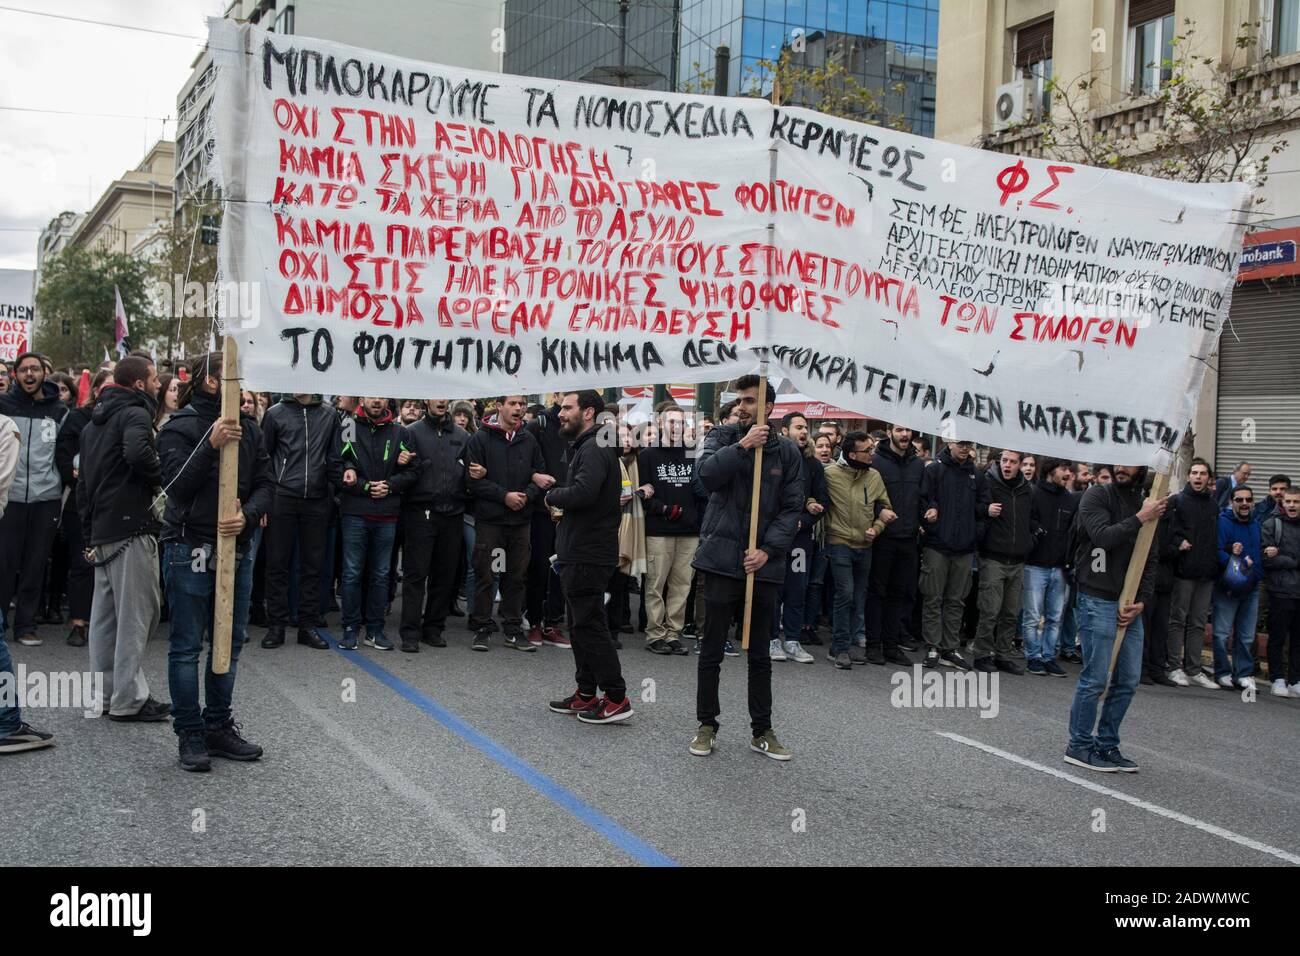 Athens, Greece. 5th Dec, 2019. Students rally holding banners and shout slogans against the government and the minister of education. University students once more took to the streets to demonstrate against upcoming reforms in education, police repression as well as the abolition of the universities' asylum law. Credit: Nikolas Georgiou/Alamy Live News Stock Photo